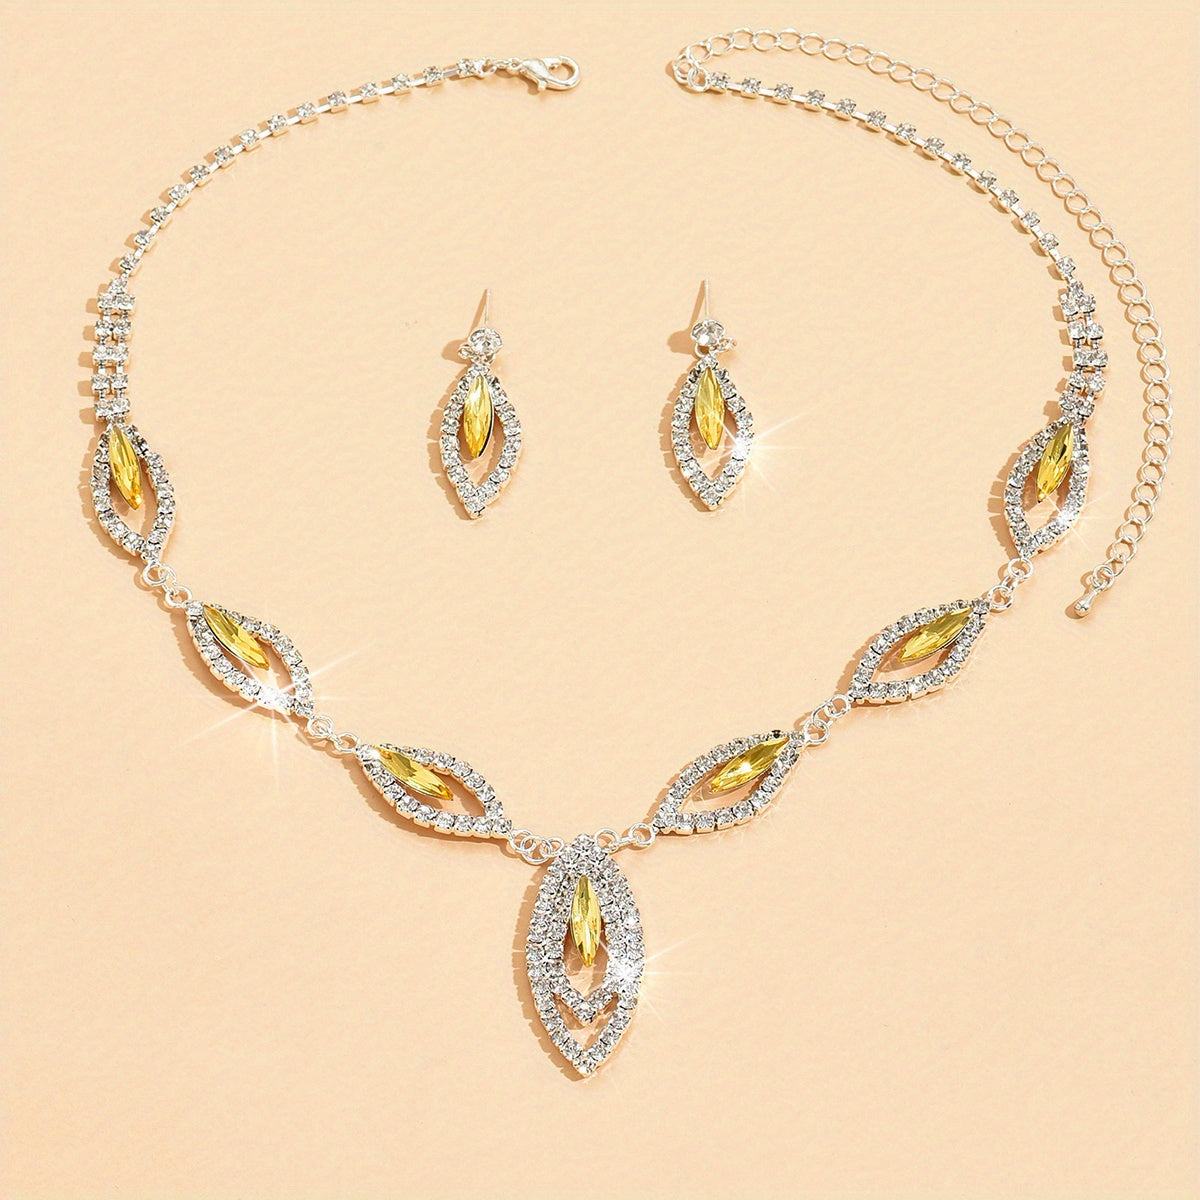 3pcs Elegant Silver Plated Rhinestone Jewelry Set for Weddings, Parties, and Special Occasions